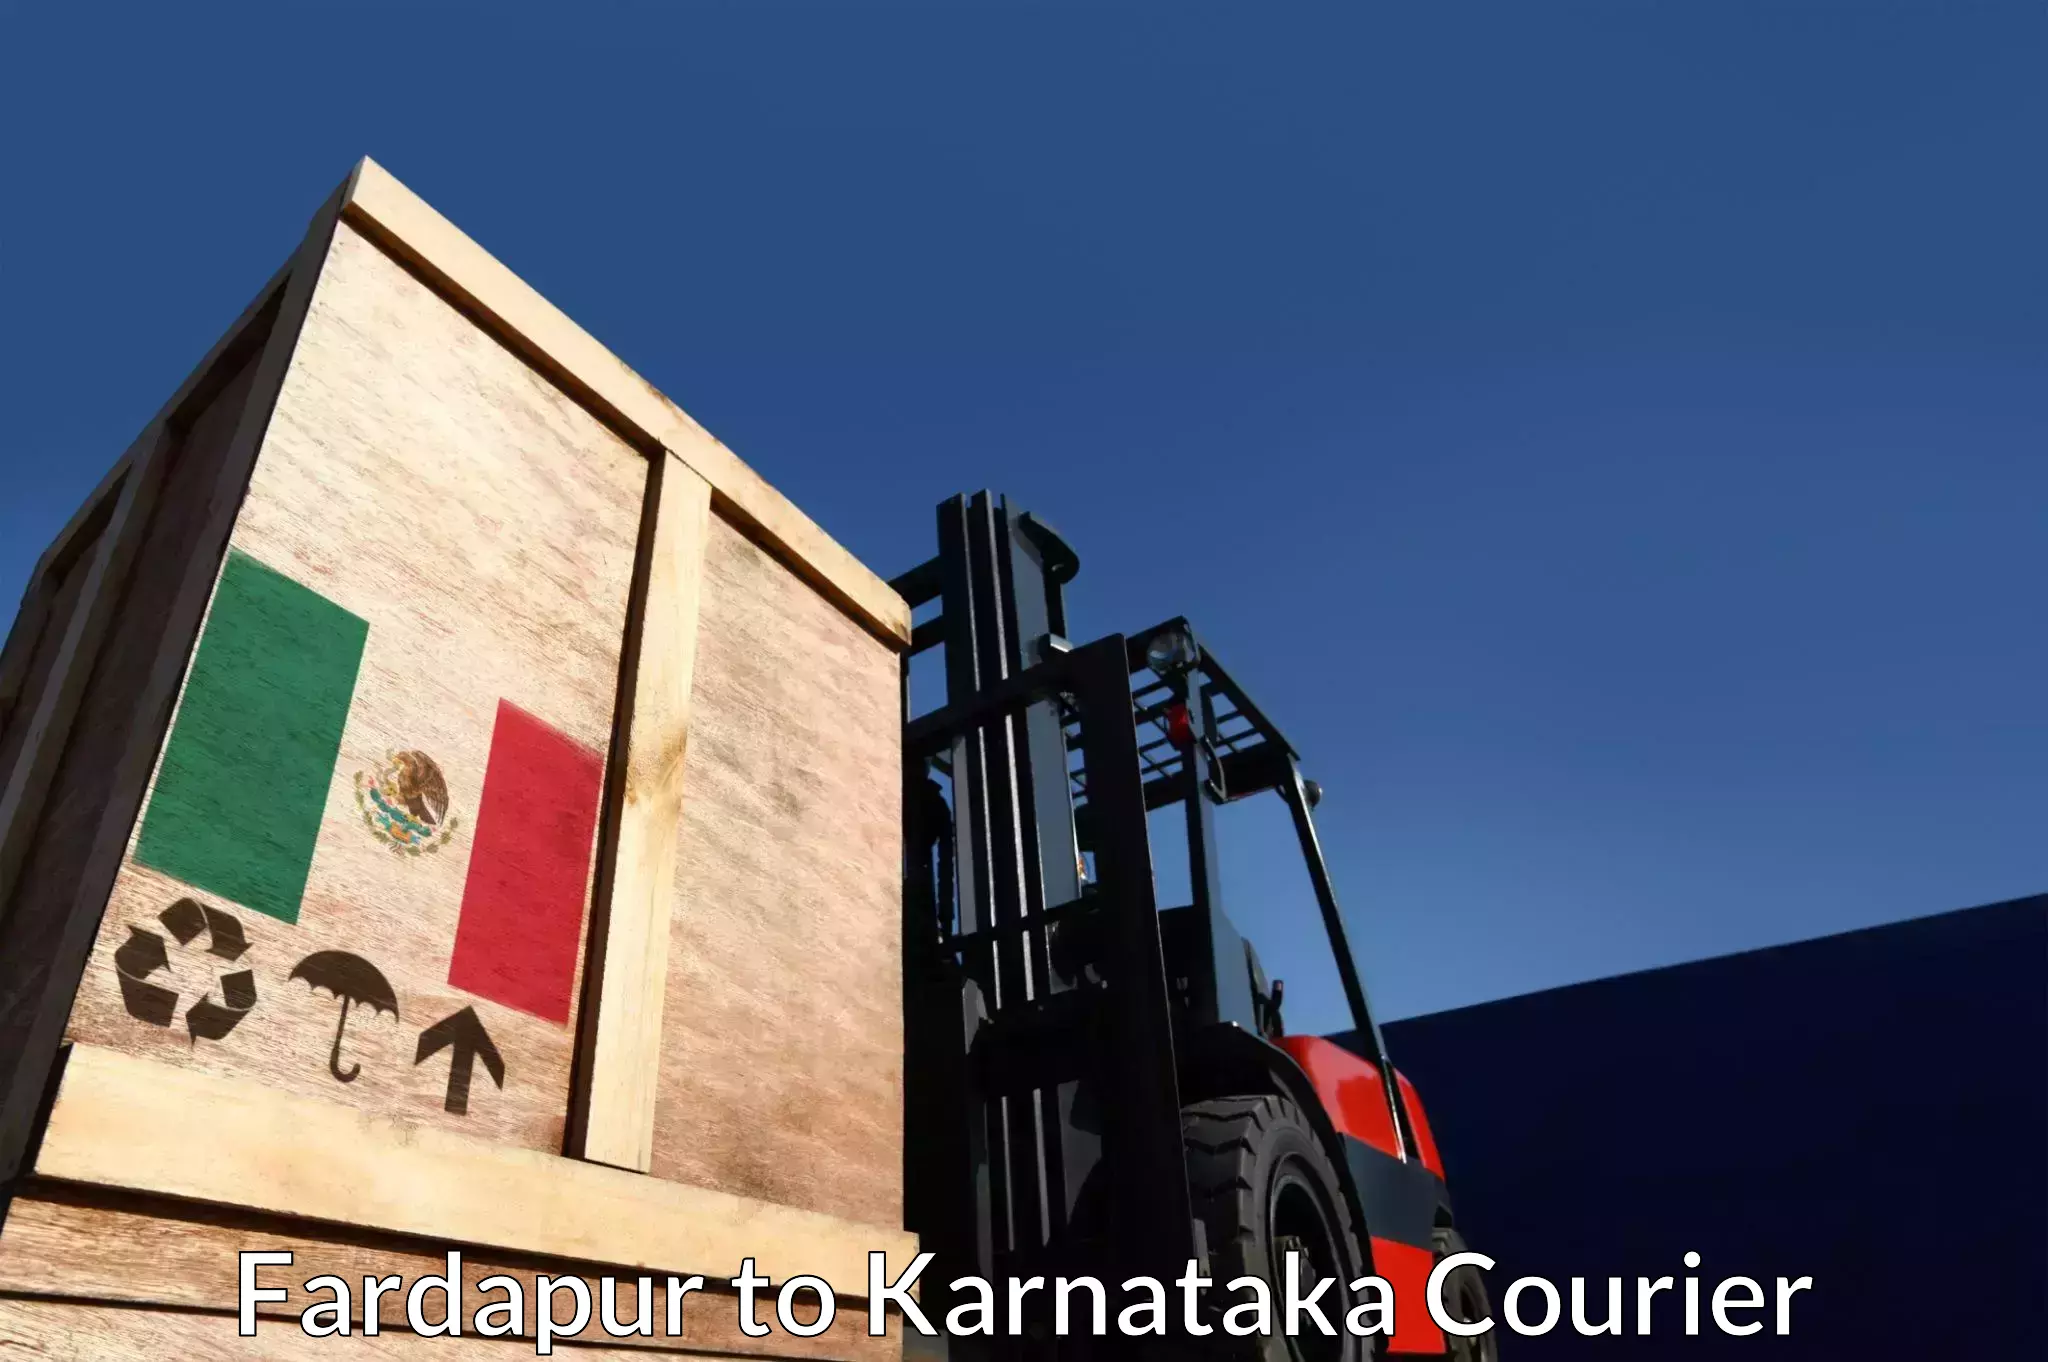 Courier service partnerships in Fardapur to Mangalore Port